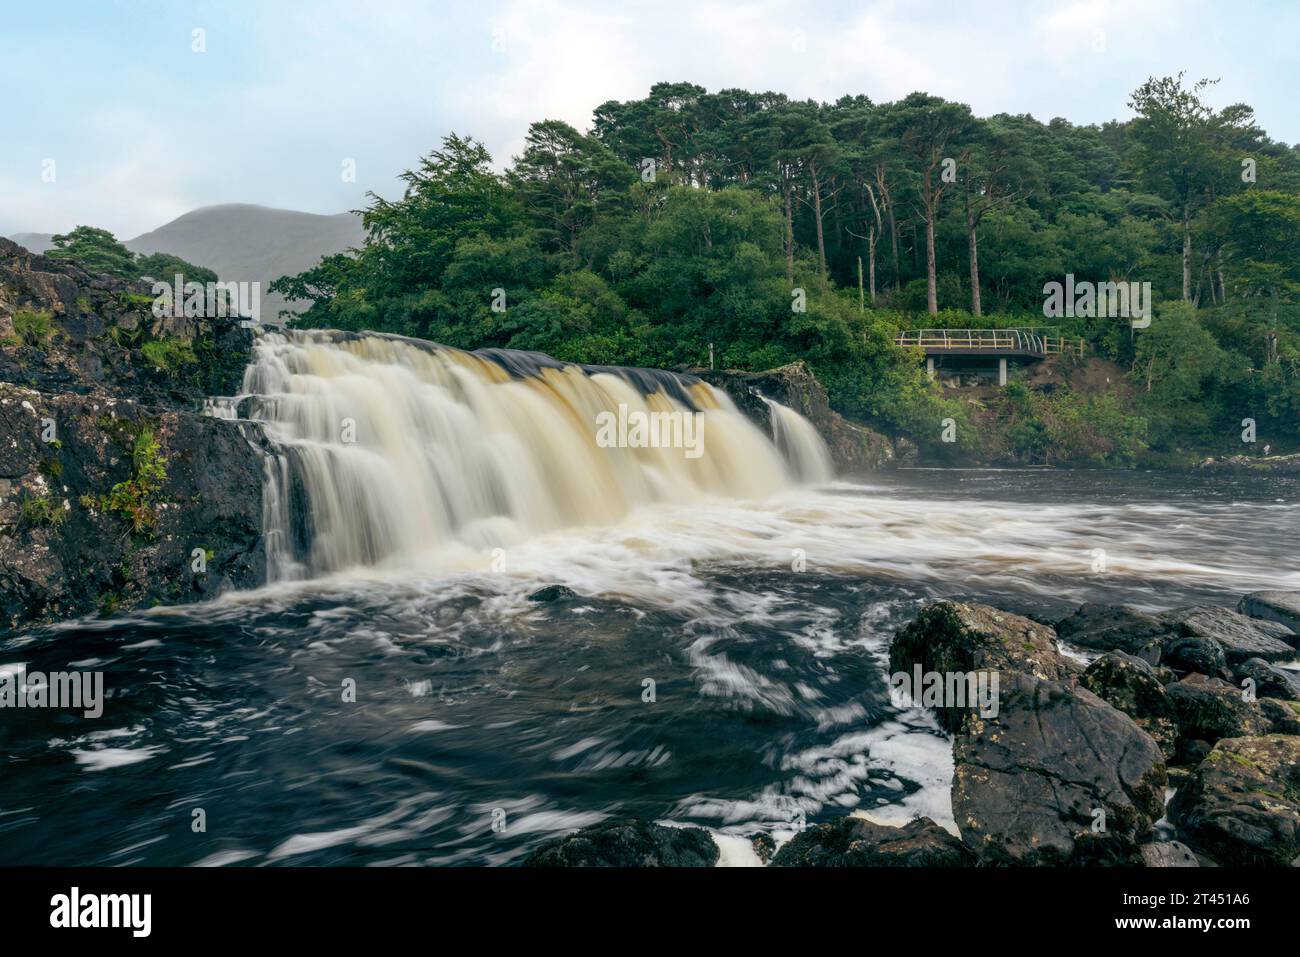 Aasleagh Falls is a waterfall located in County Mayo, Ireland on the Wild Atlantic Way. Stock Photo